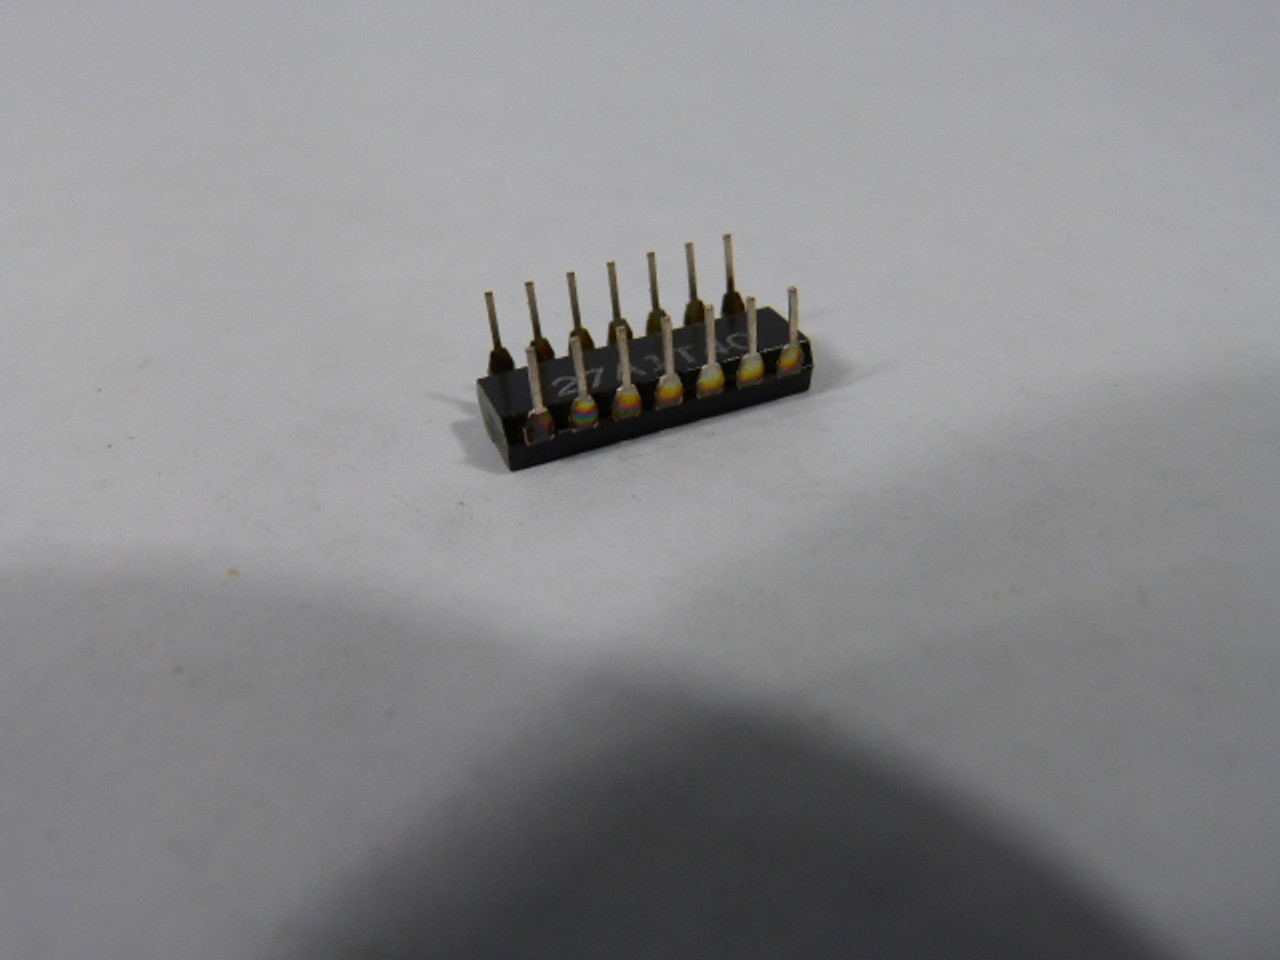 Texas Instruments SN7427N Plastic Dipped 14 Pin Integrated Circuit USED